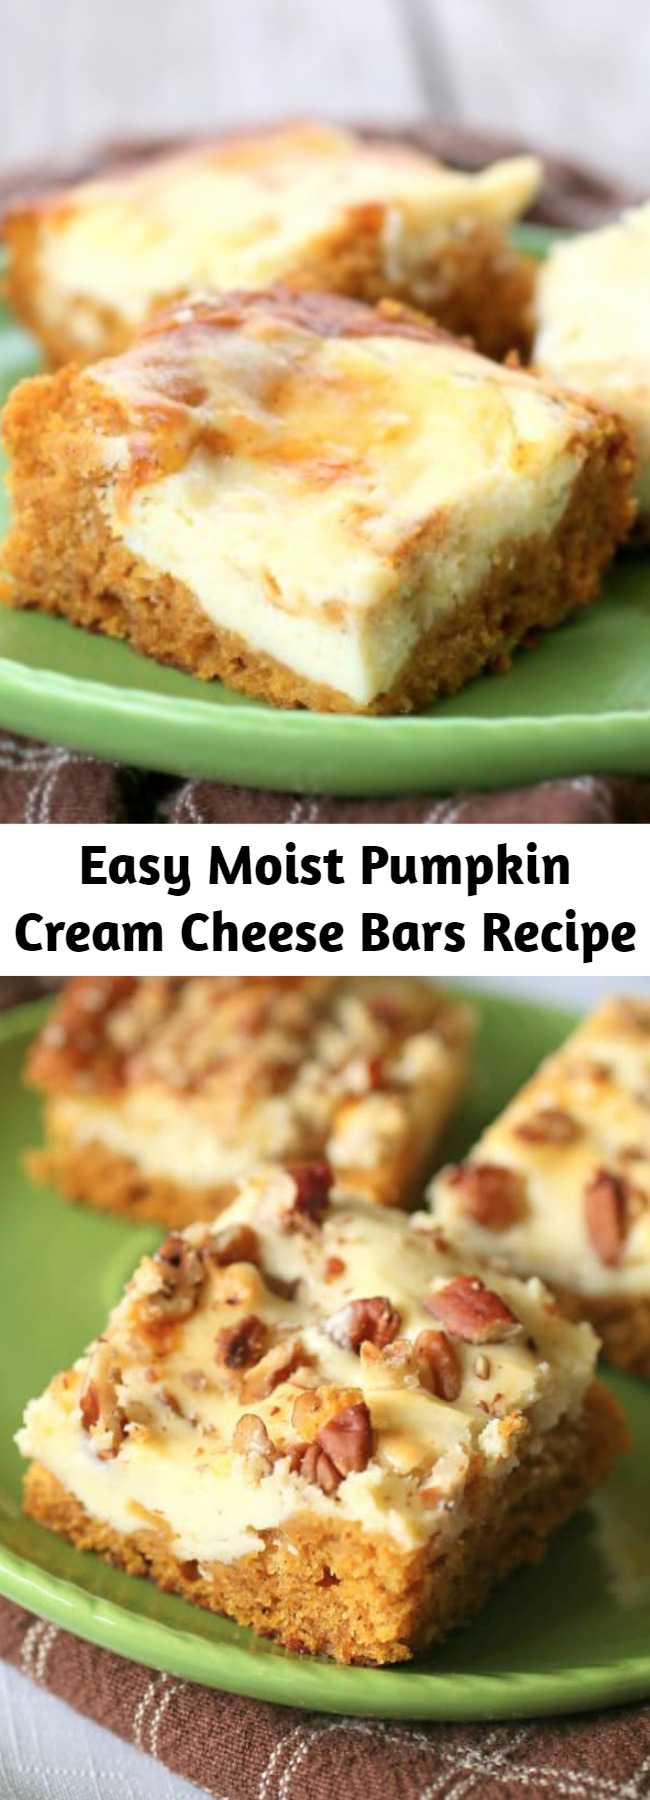 Easy Moist Pumpkin Cream Cheese Bars Recipe - These Pumpkin Cream Cheese Bars are moist pumpkin bars with swirls of cream cheese frosting throughout. This dessert will be on your fall treat recipe list every year.